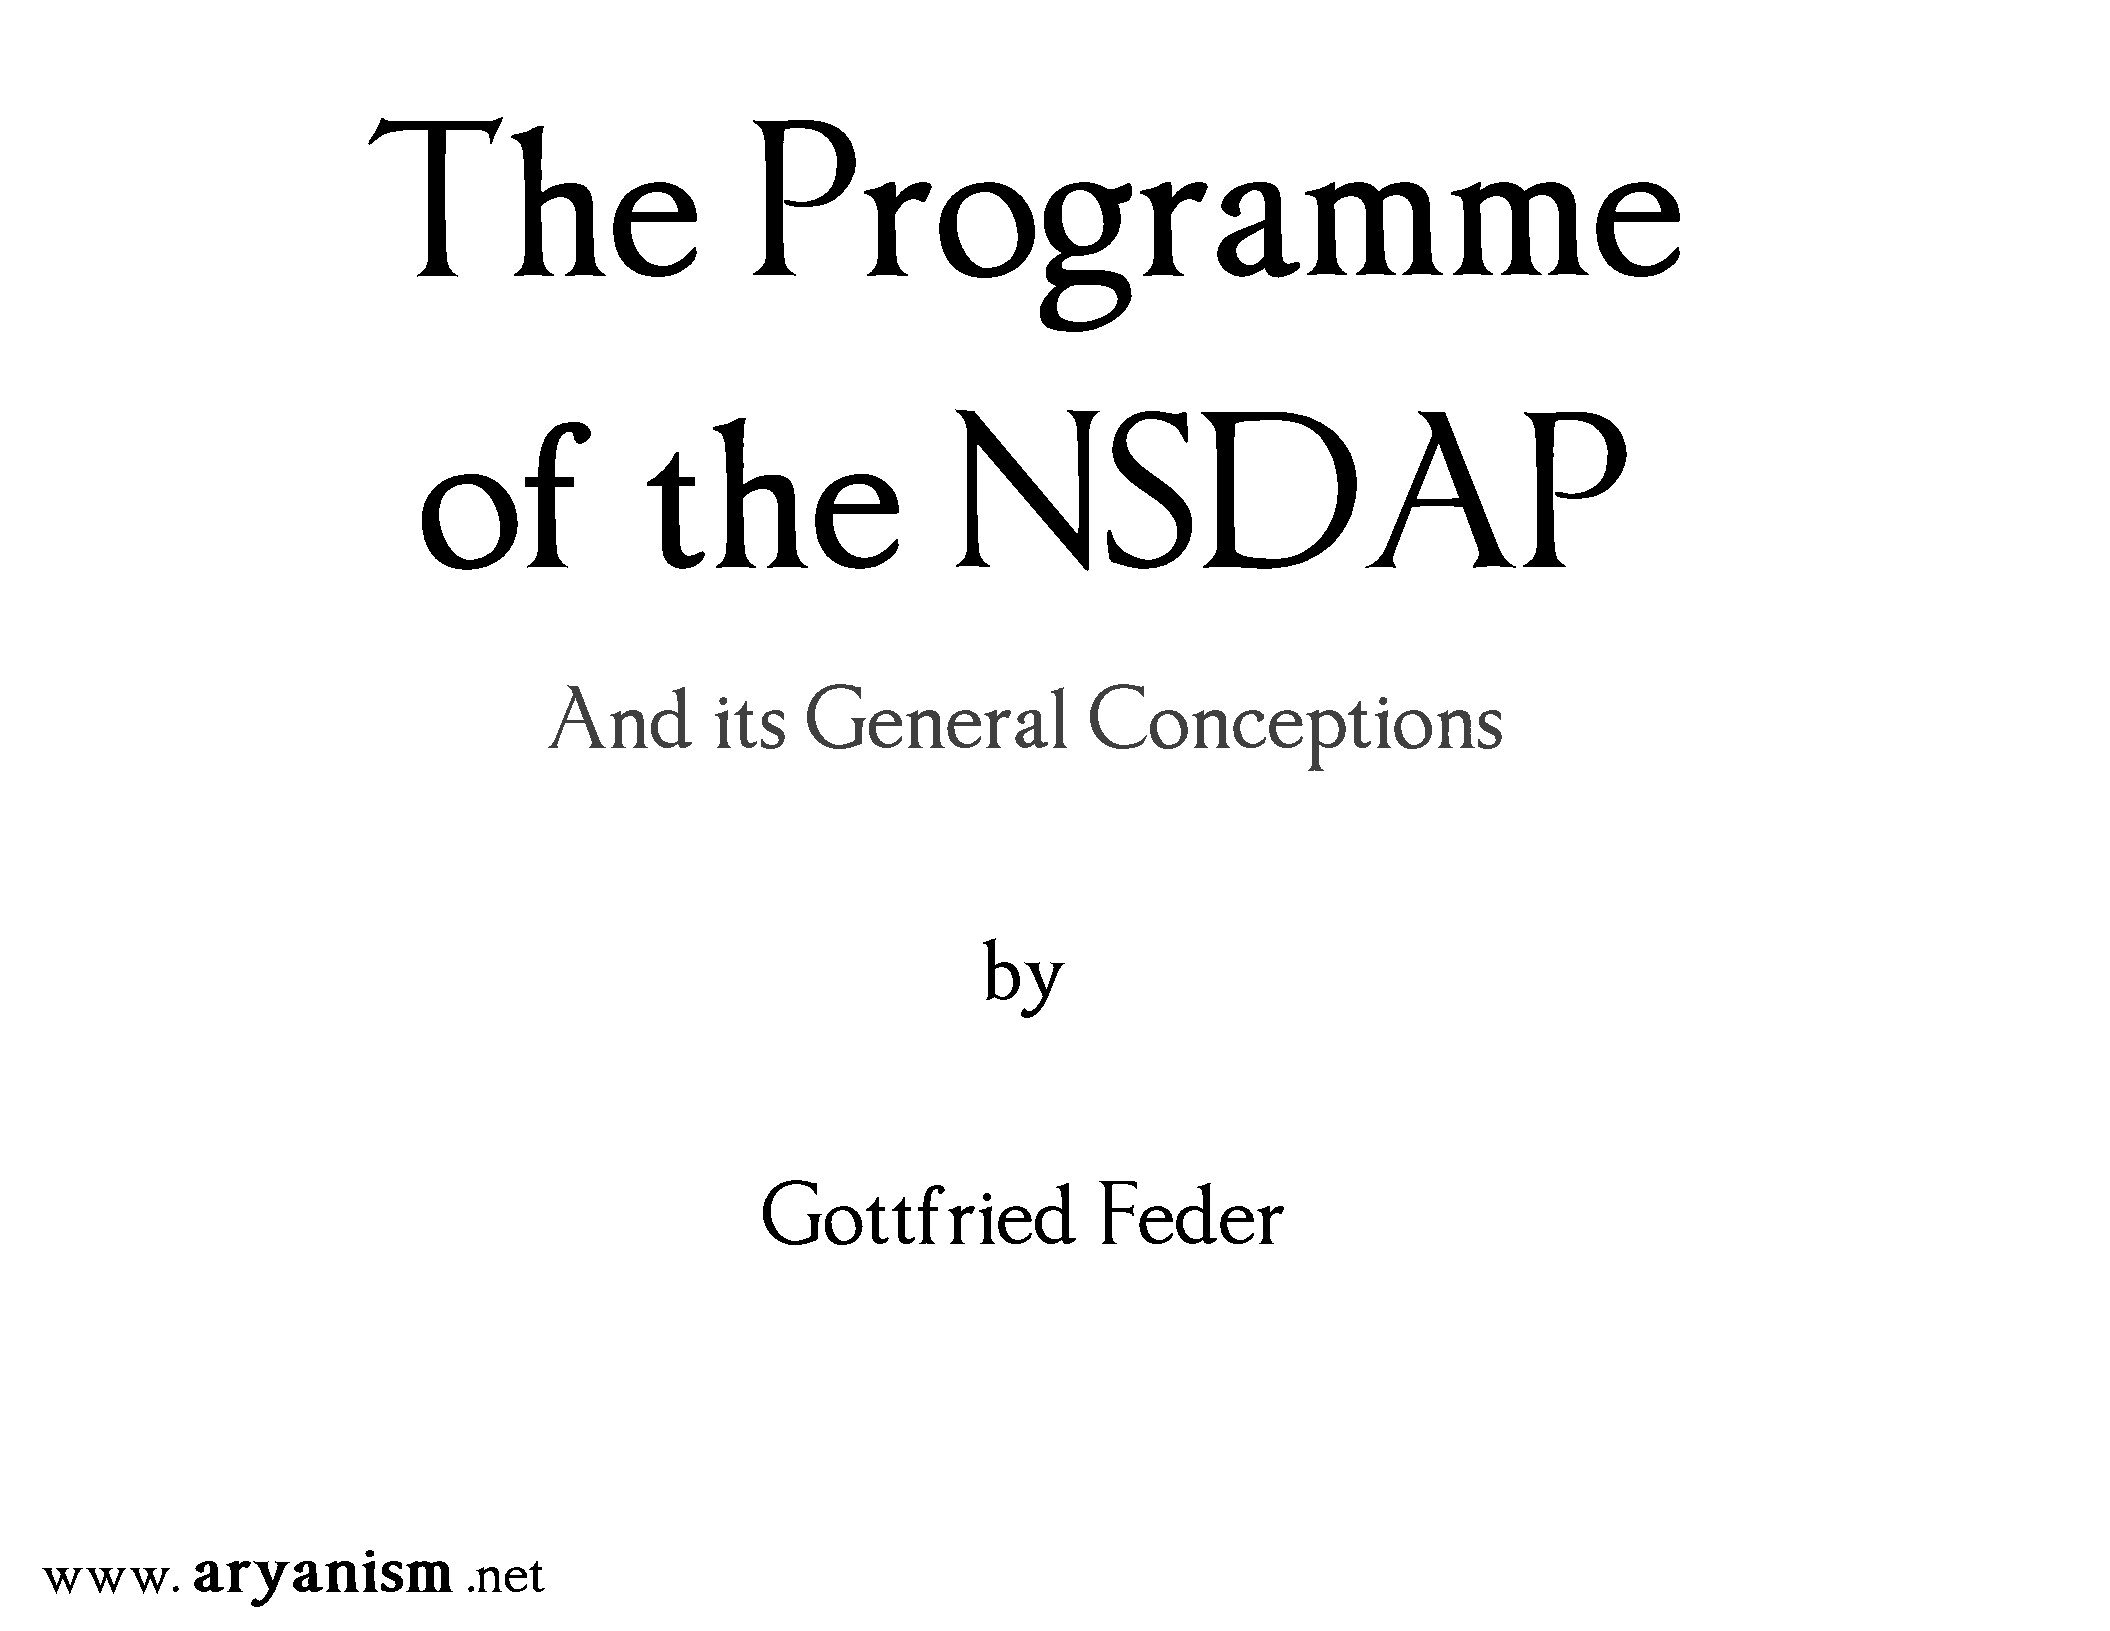 Party Programme of the NSDAP